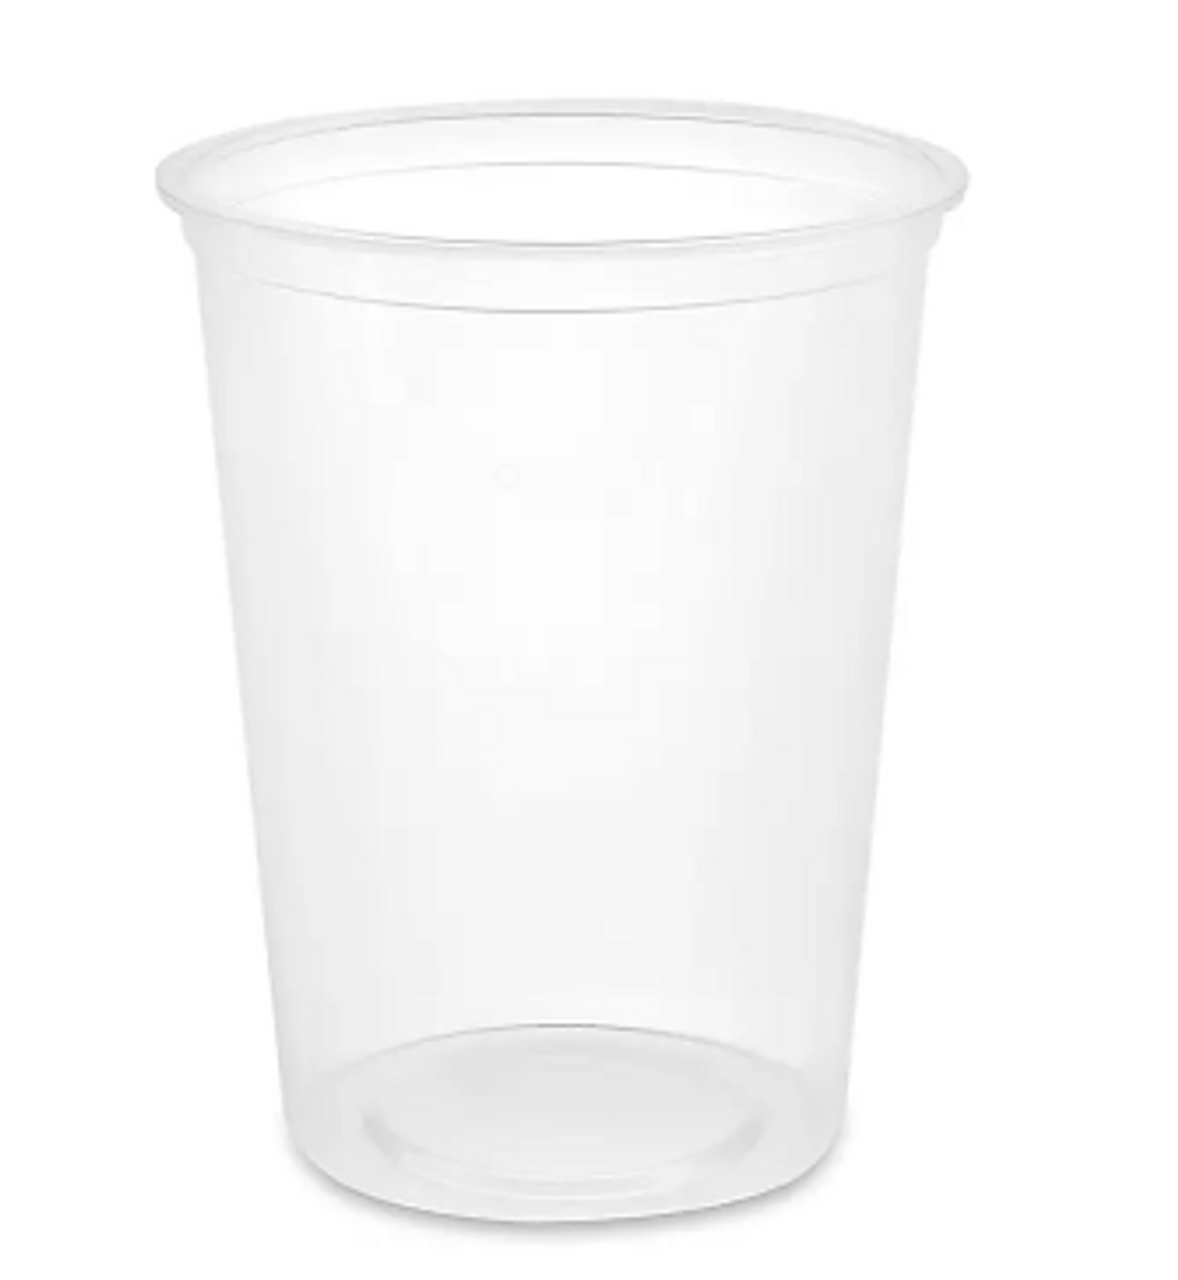  Fabrikal PK32T 32 oz. Clear Round Pro-Kal Microwavable Deli  Container - 500 per Case : Health & Household